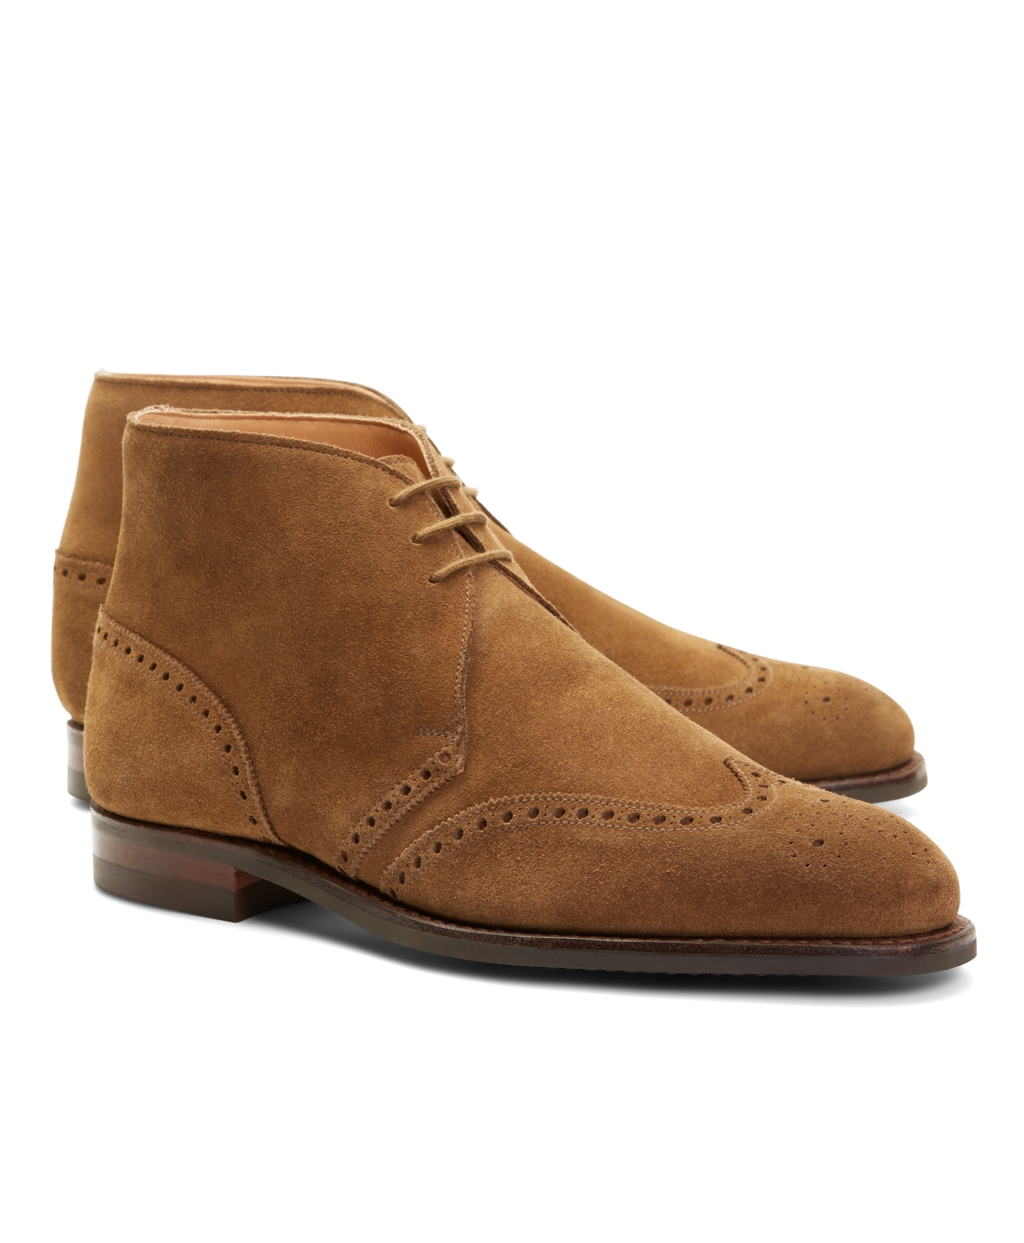 Lyst - Brooks Brothers Peal & Co.® Suede Wingtip Boots in Brown for Men